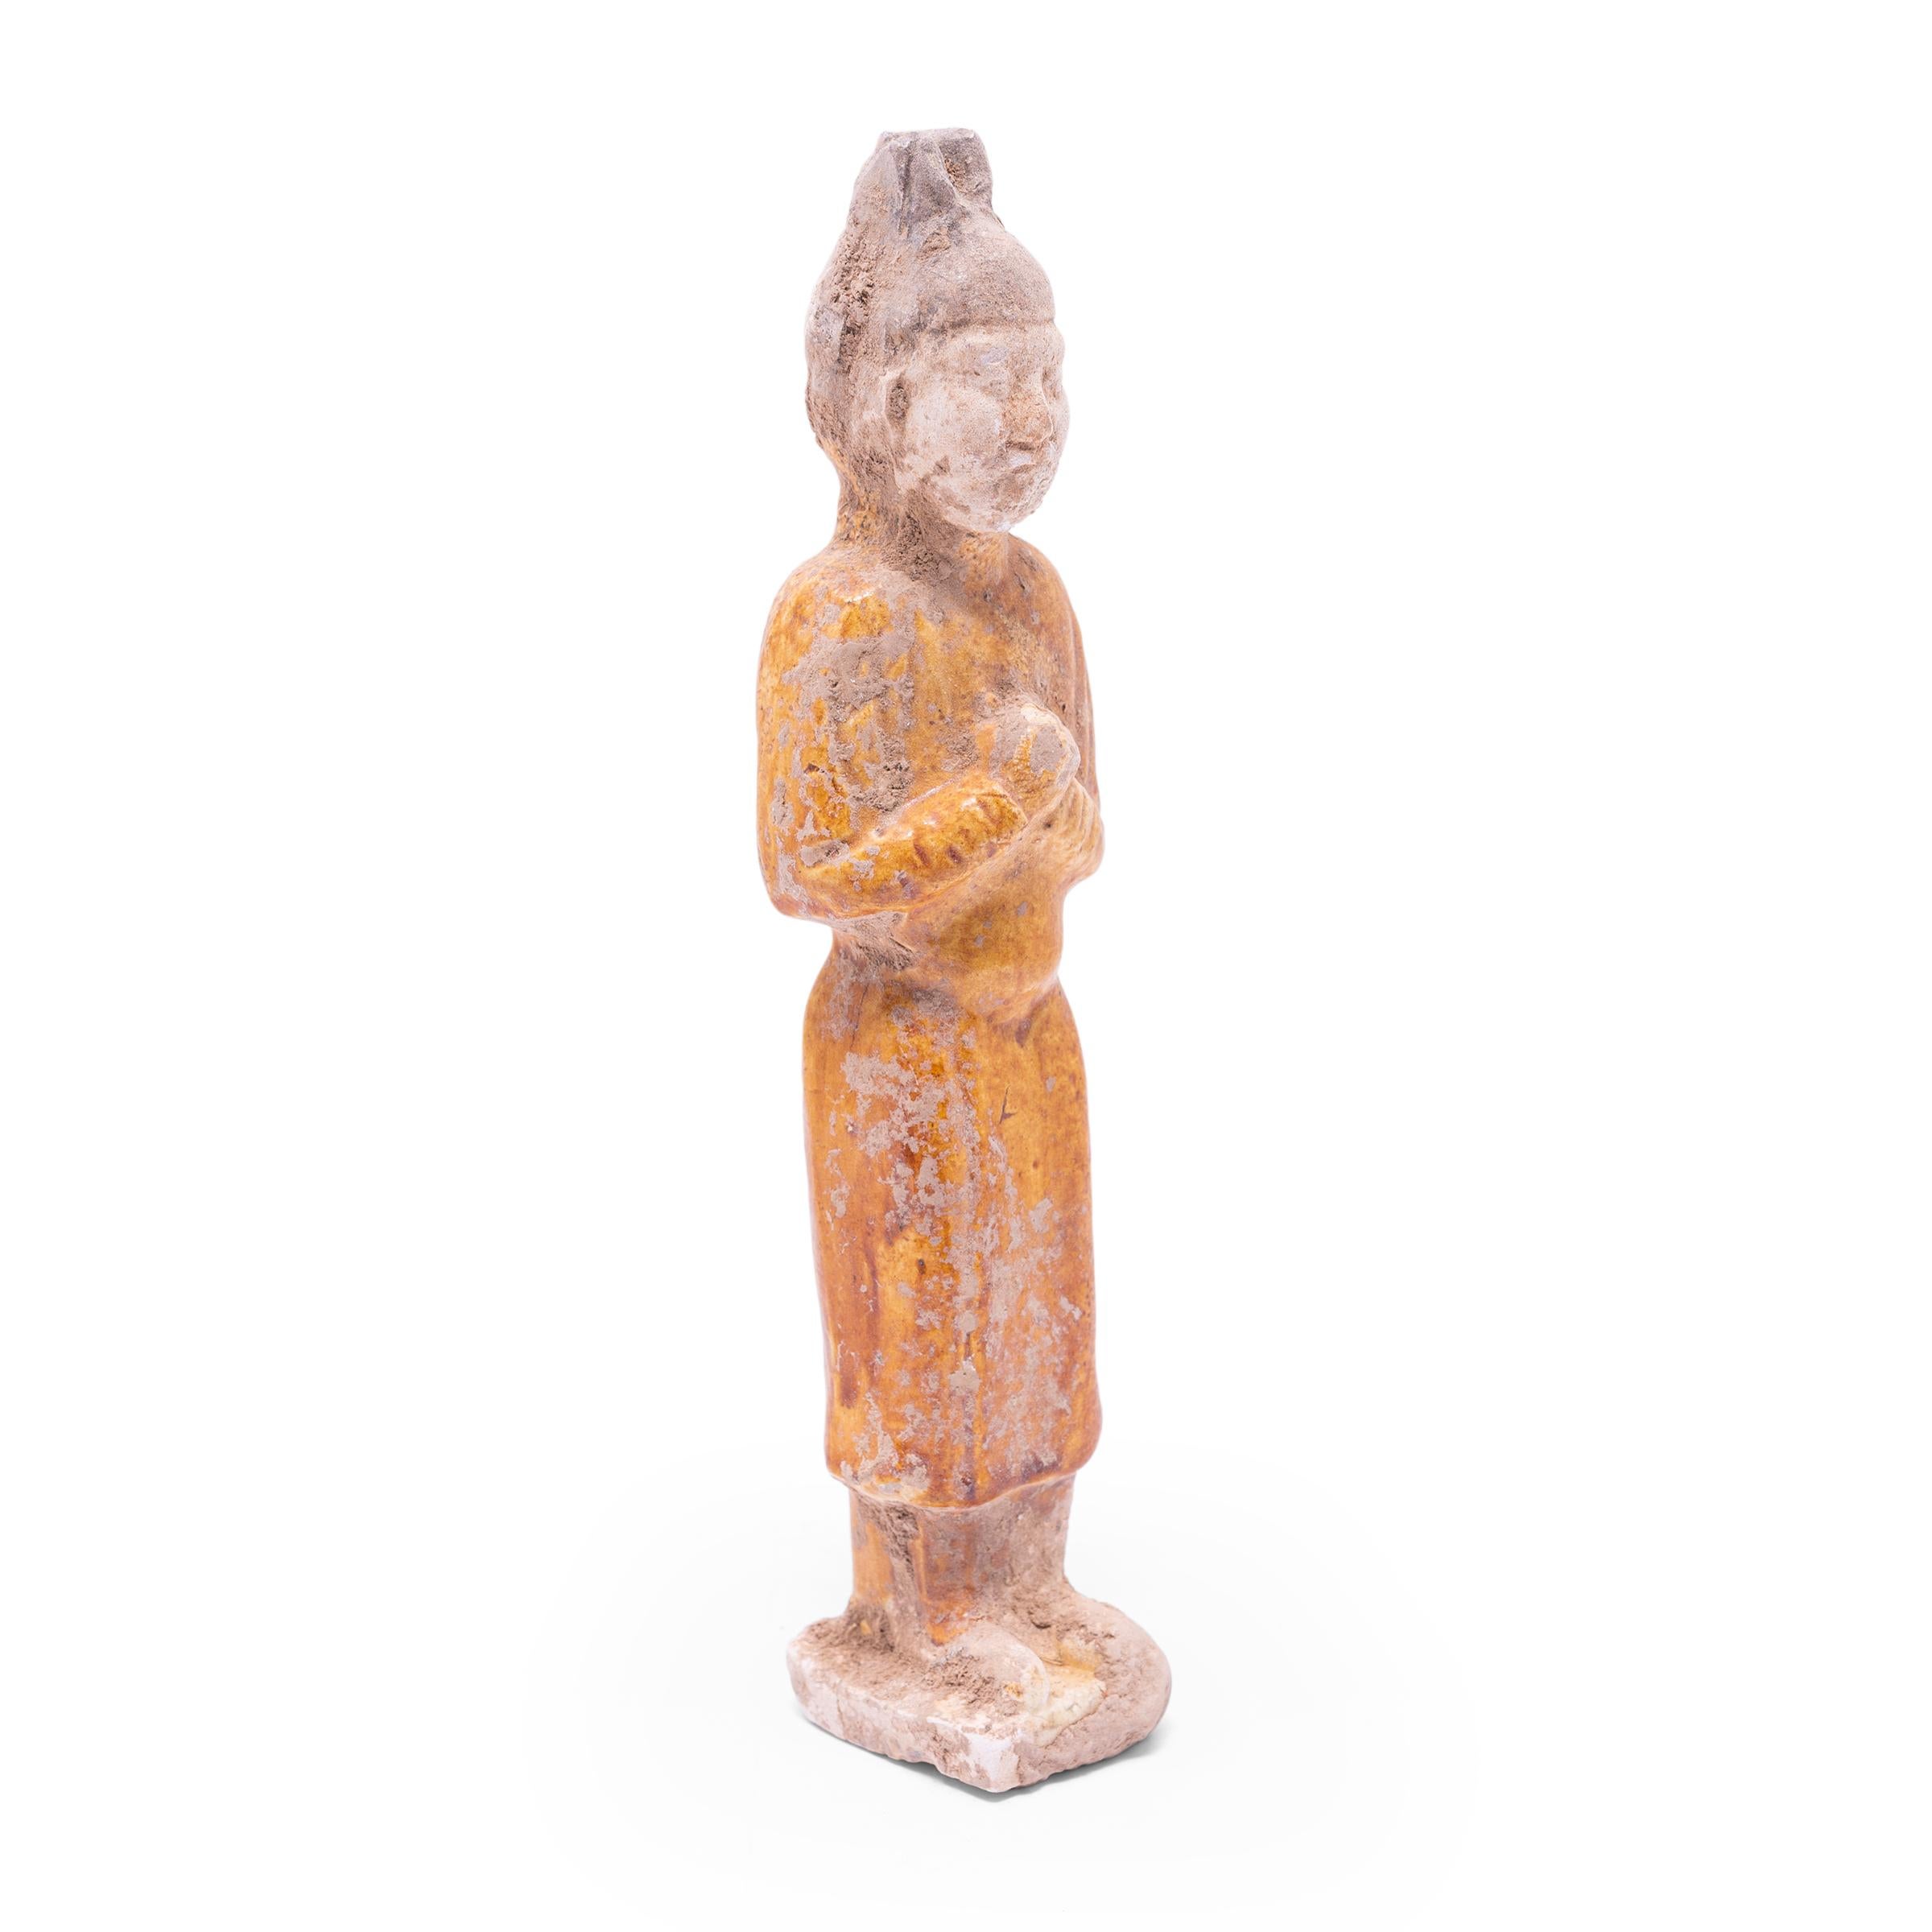 Molded of earthenware, this petite sculpture is a type of centuries-old burial figurine known as míngqì. Such model figures were placed in tombs of individuals with high status to ensure a safe journey to the afterlife. Meant to depict the pleasures